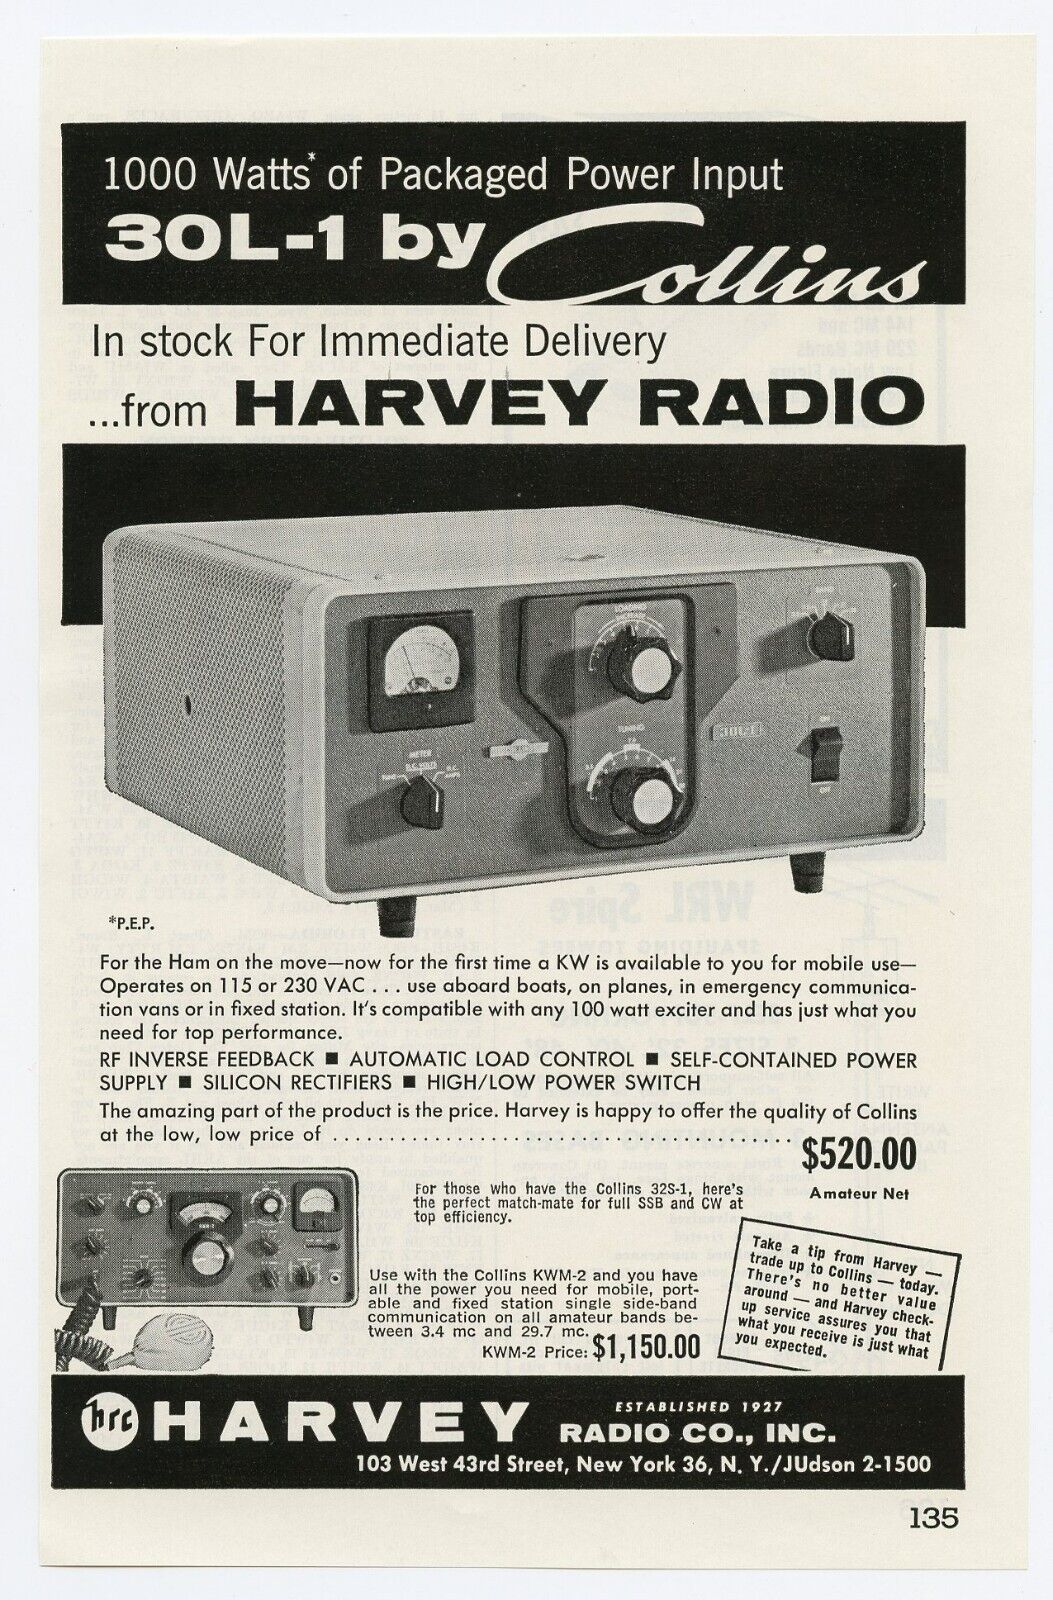 QST Ham Radio Mag. Ad 1000 Watts of Packaged Power Input COLLINS 30L-1 (7/62)